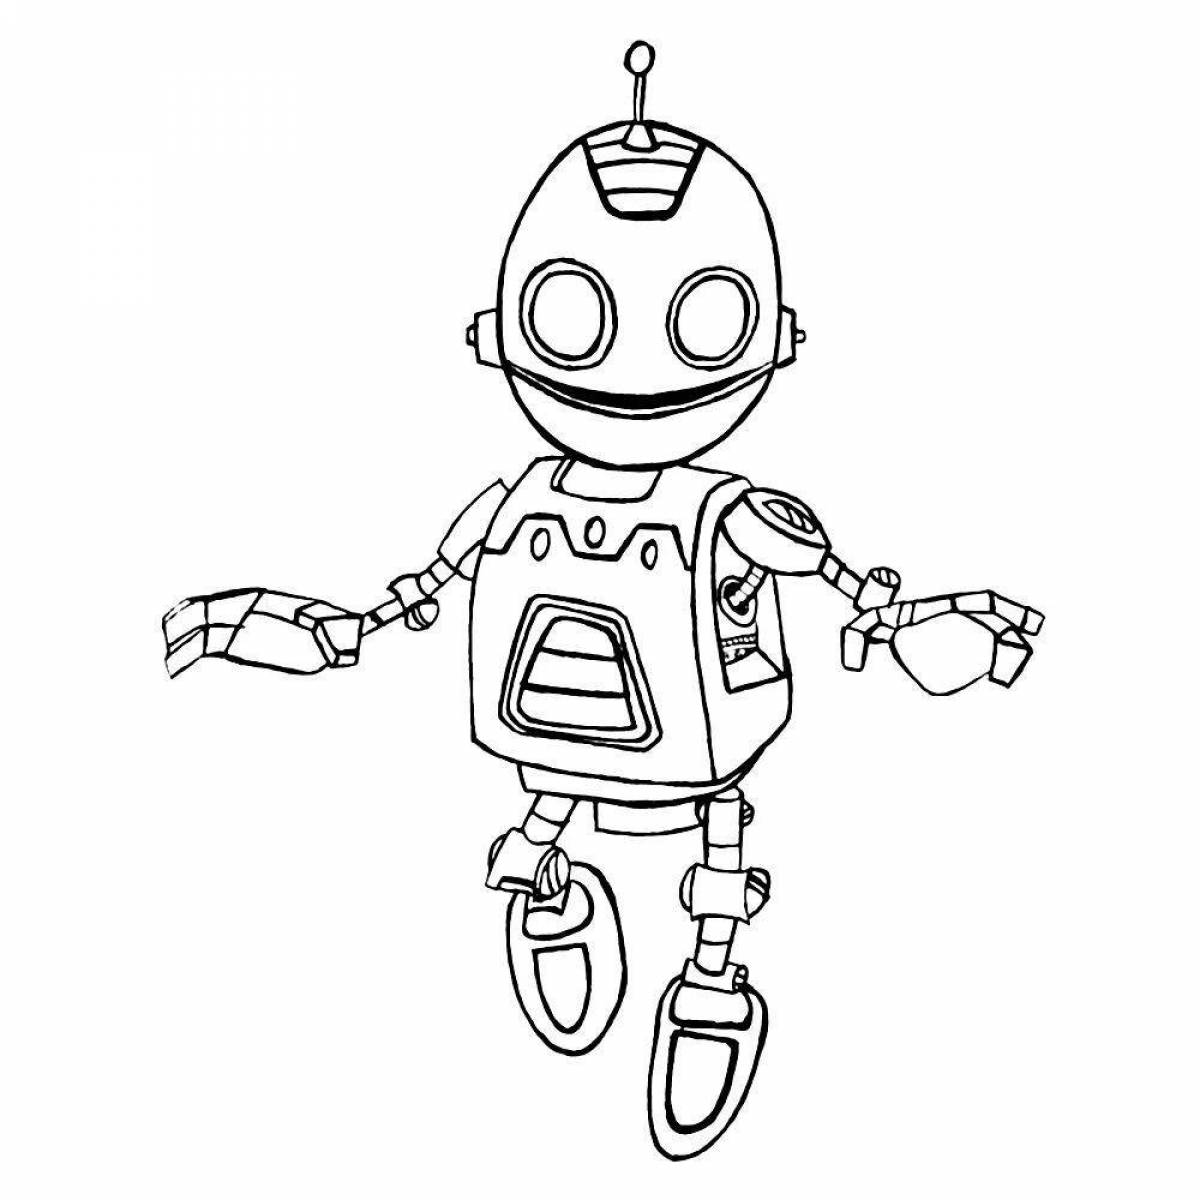 Glowing galactic robots coloring page